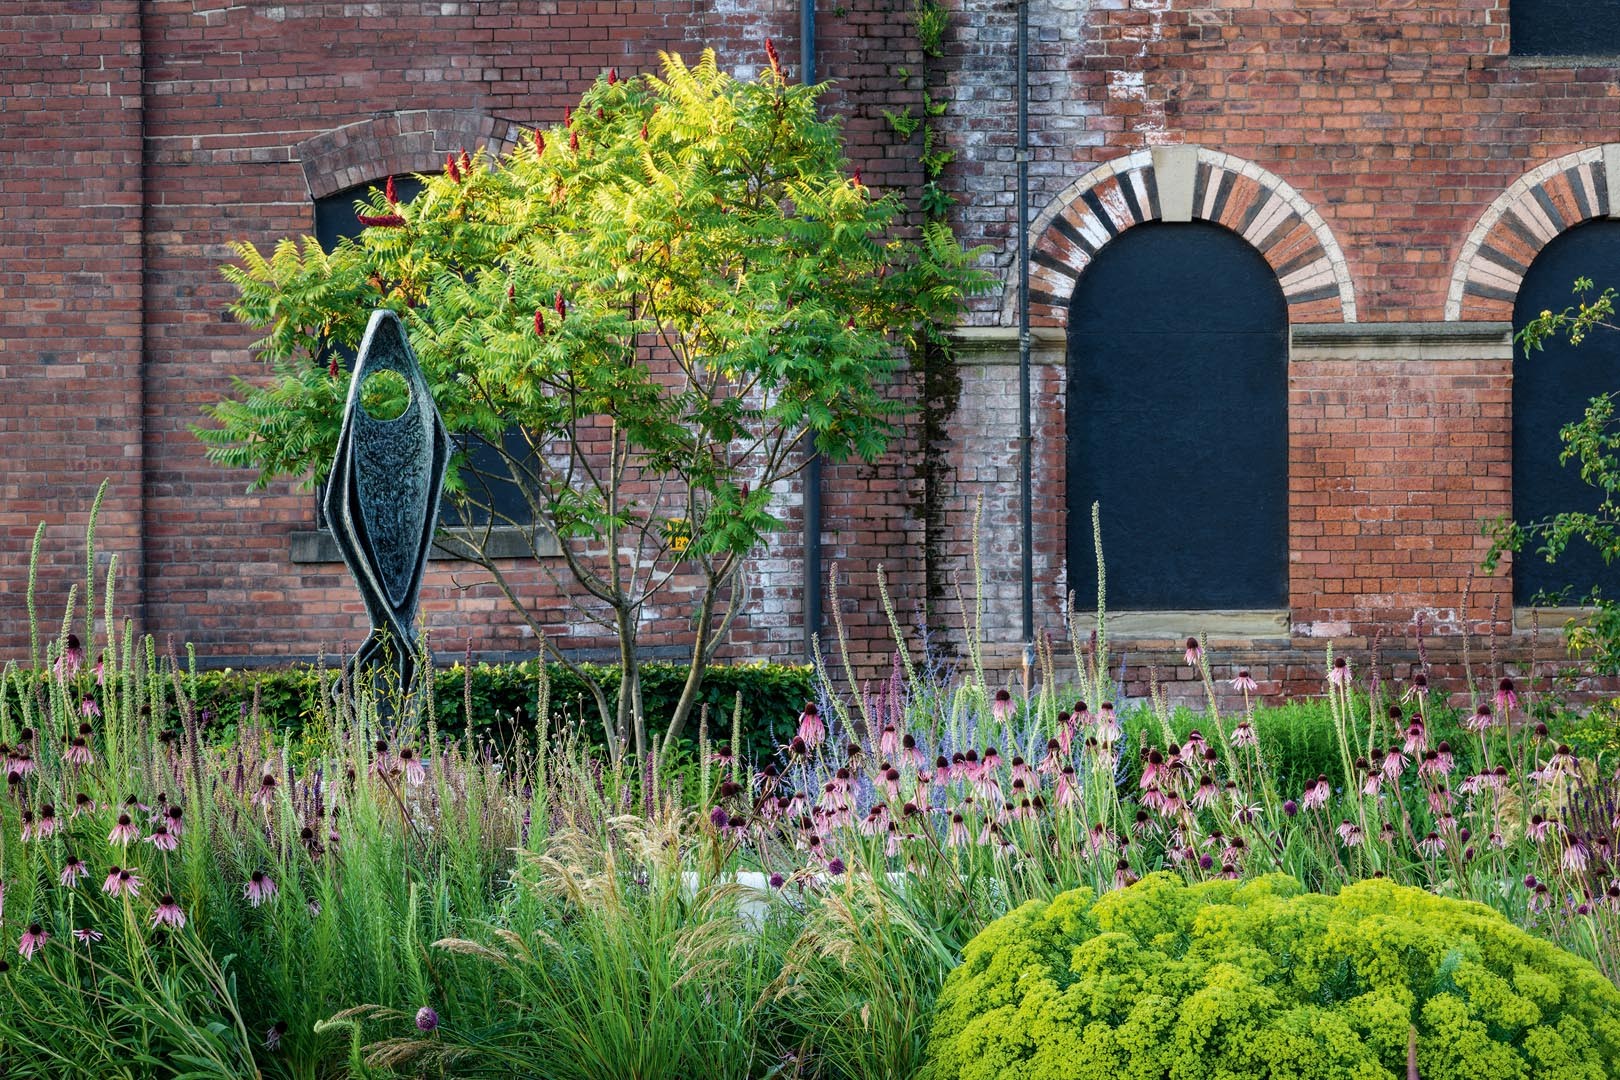 The red brick walls of the old Rutland Mills highlight the intensity of the summer green foliage of the Fagus sylvatica hedge and the foliage of the Rhus typhina that shades the sculpture Ascending Form (Gloria). Across the path Liatris pycnostachya adds height to a mix of Stipa calamagrostis, Echinacea pallida and Euphorbia seguieriana.